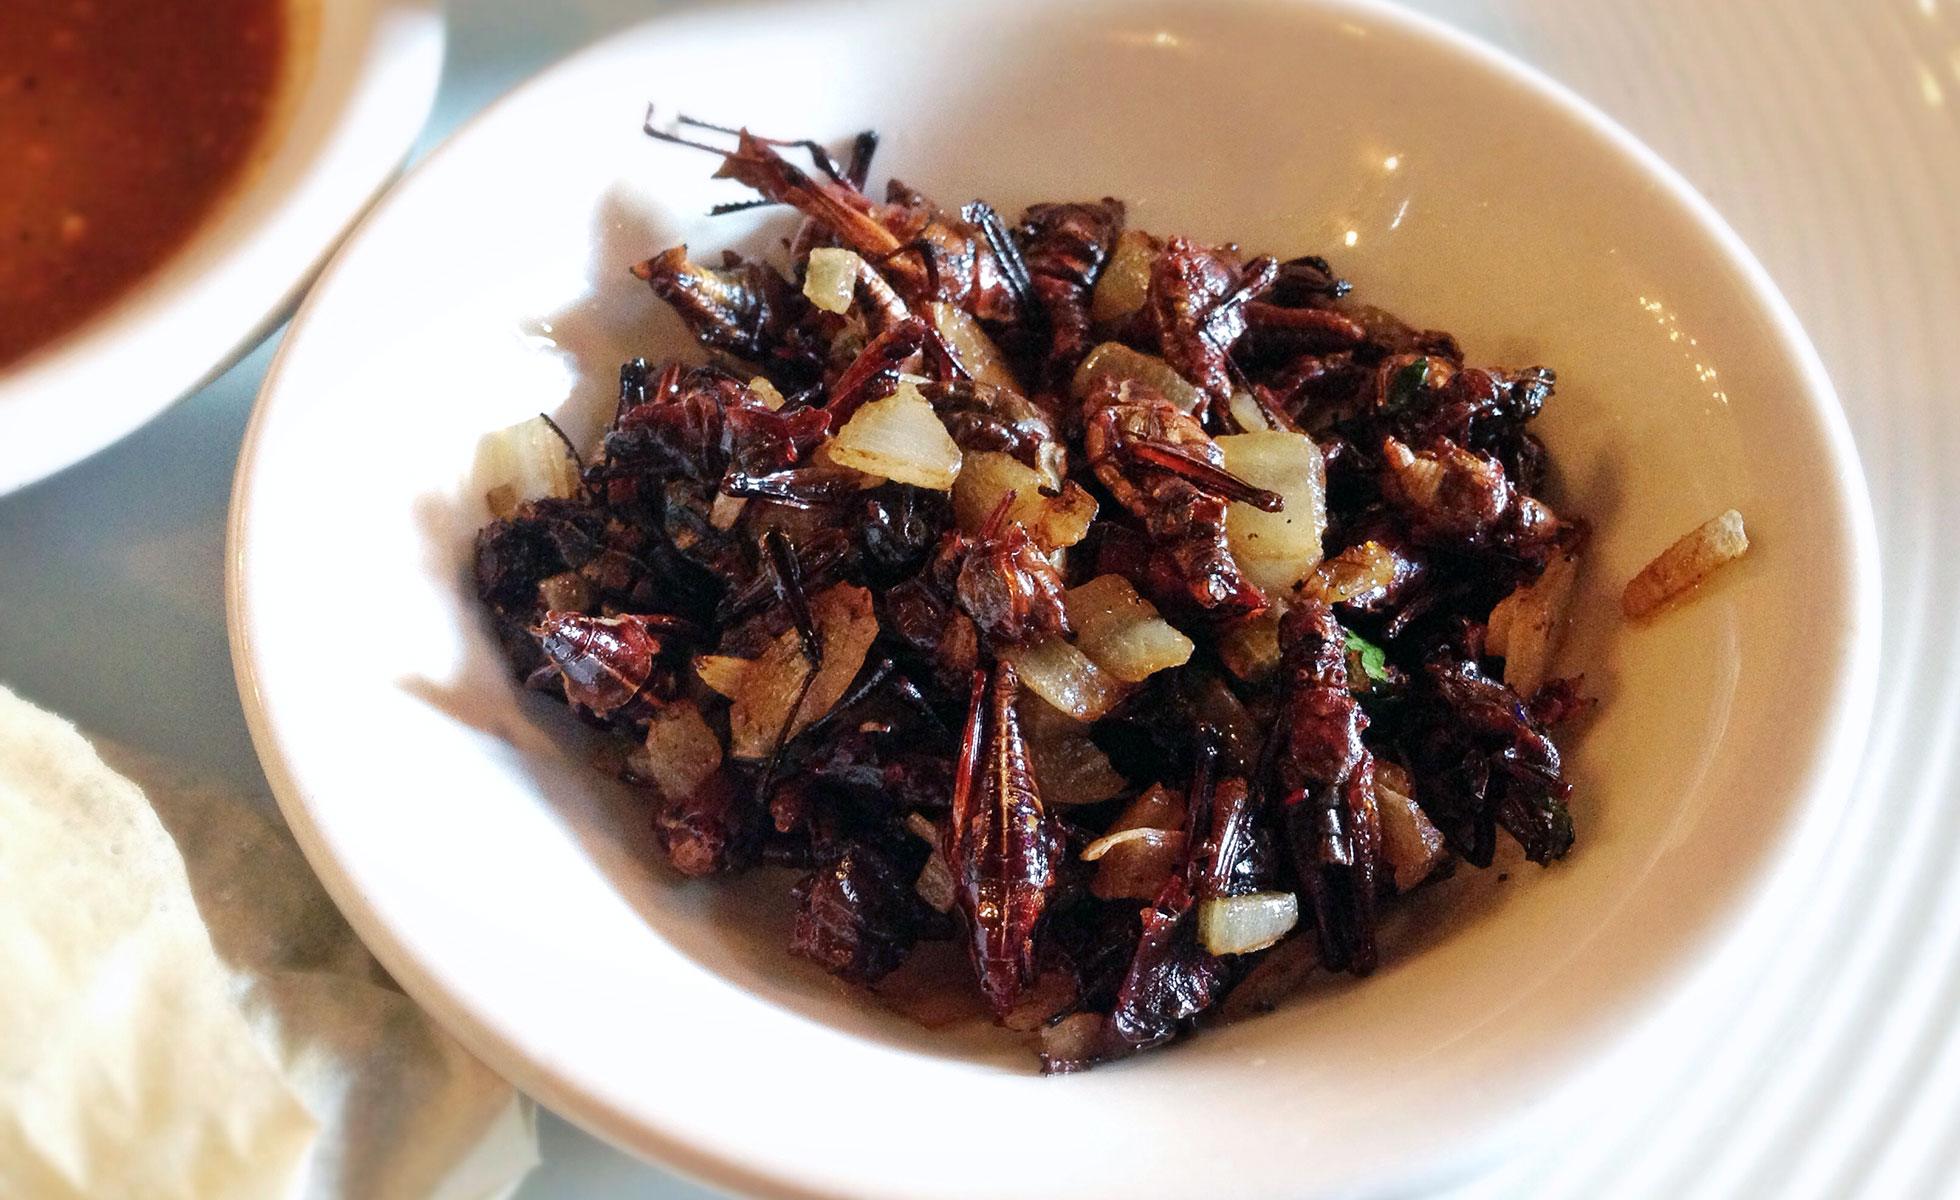 Chapulines, or grasshoppers